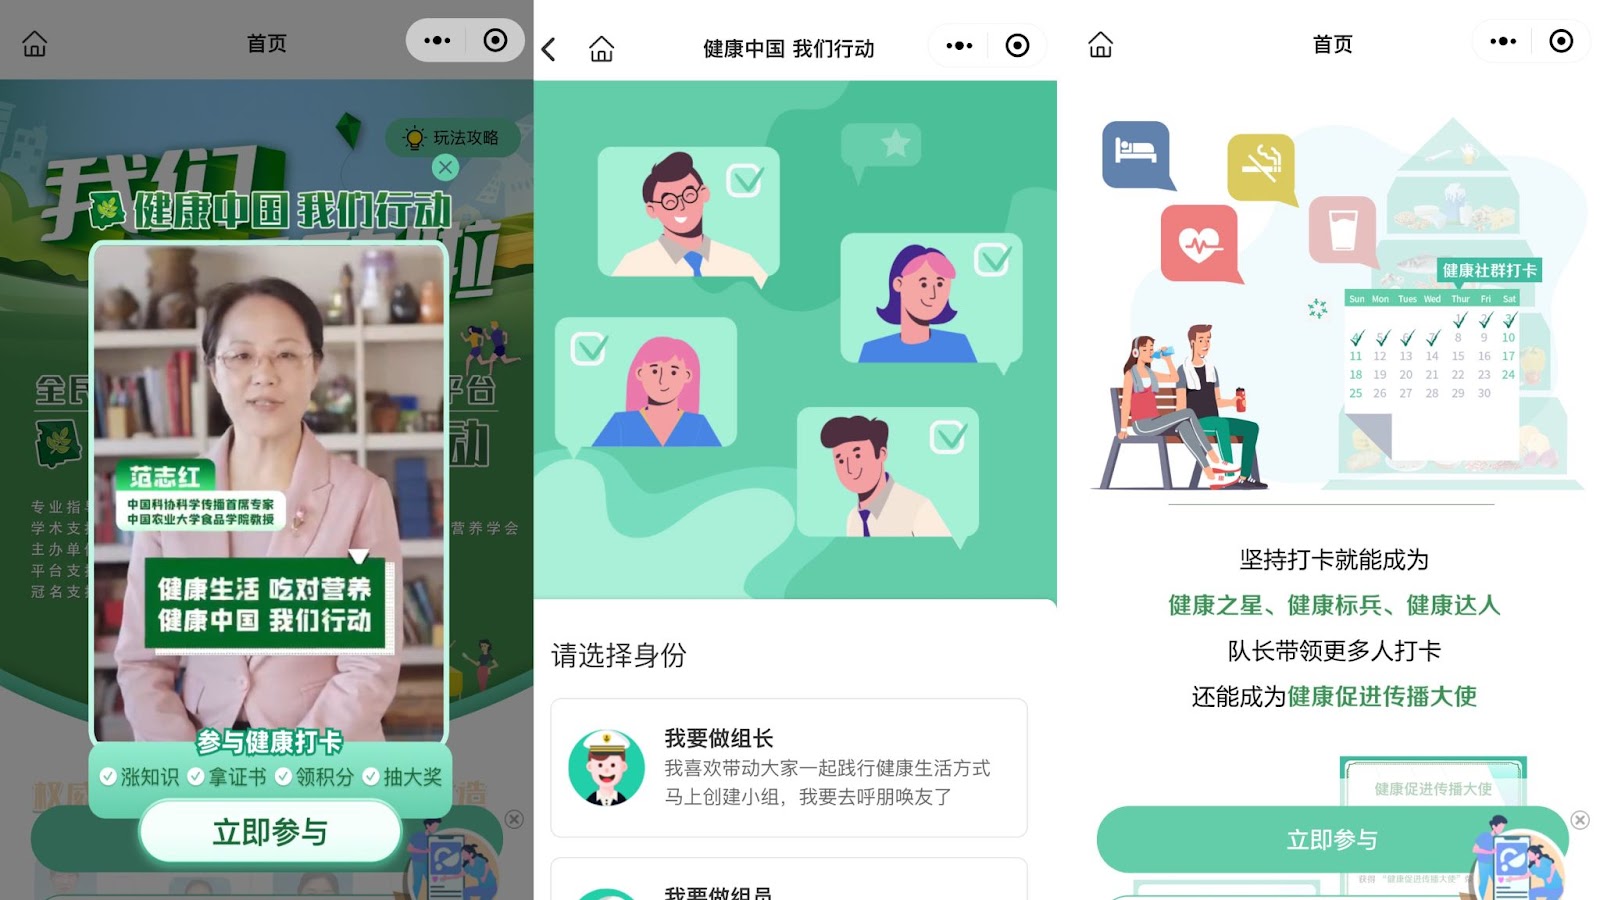 Amway‘s WeChat mini-program "Let's Take Action" for team check-ins